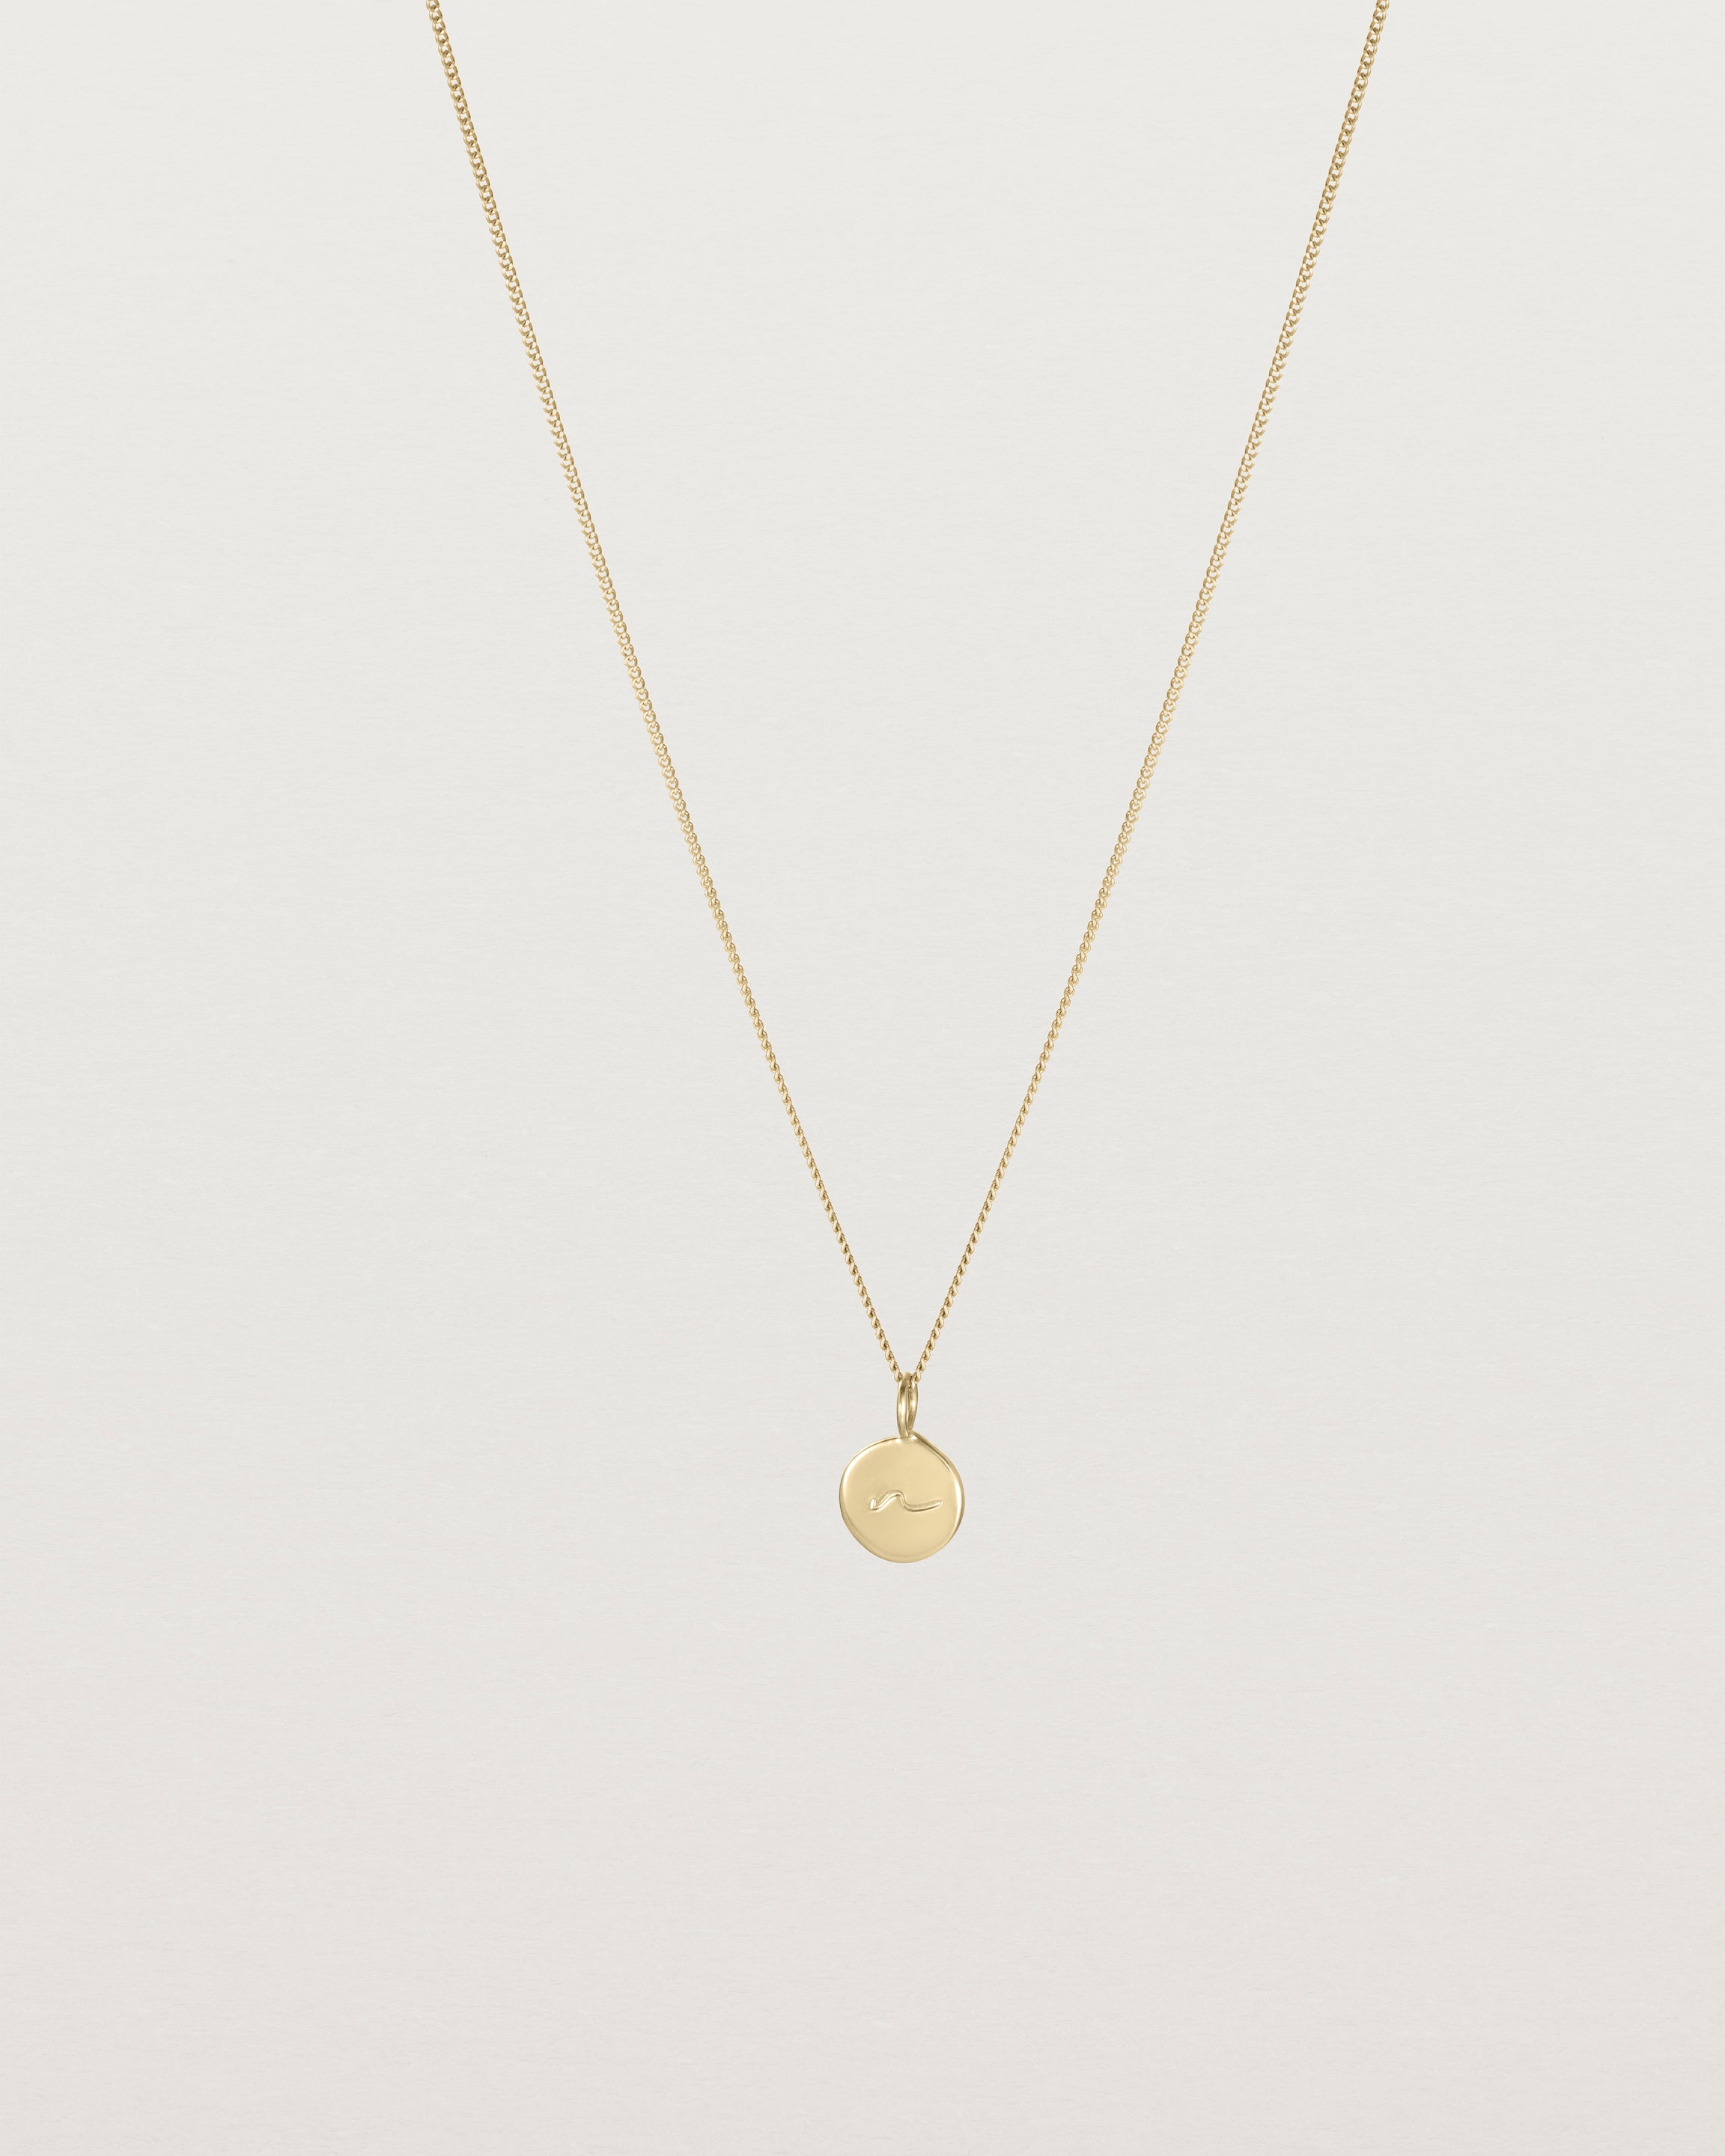 Front view of the Mae Necklace in yellow gold.